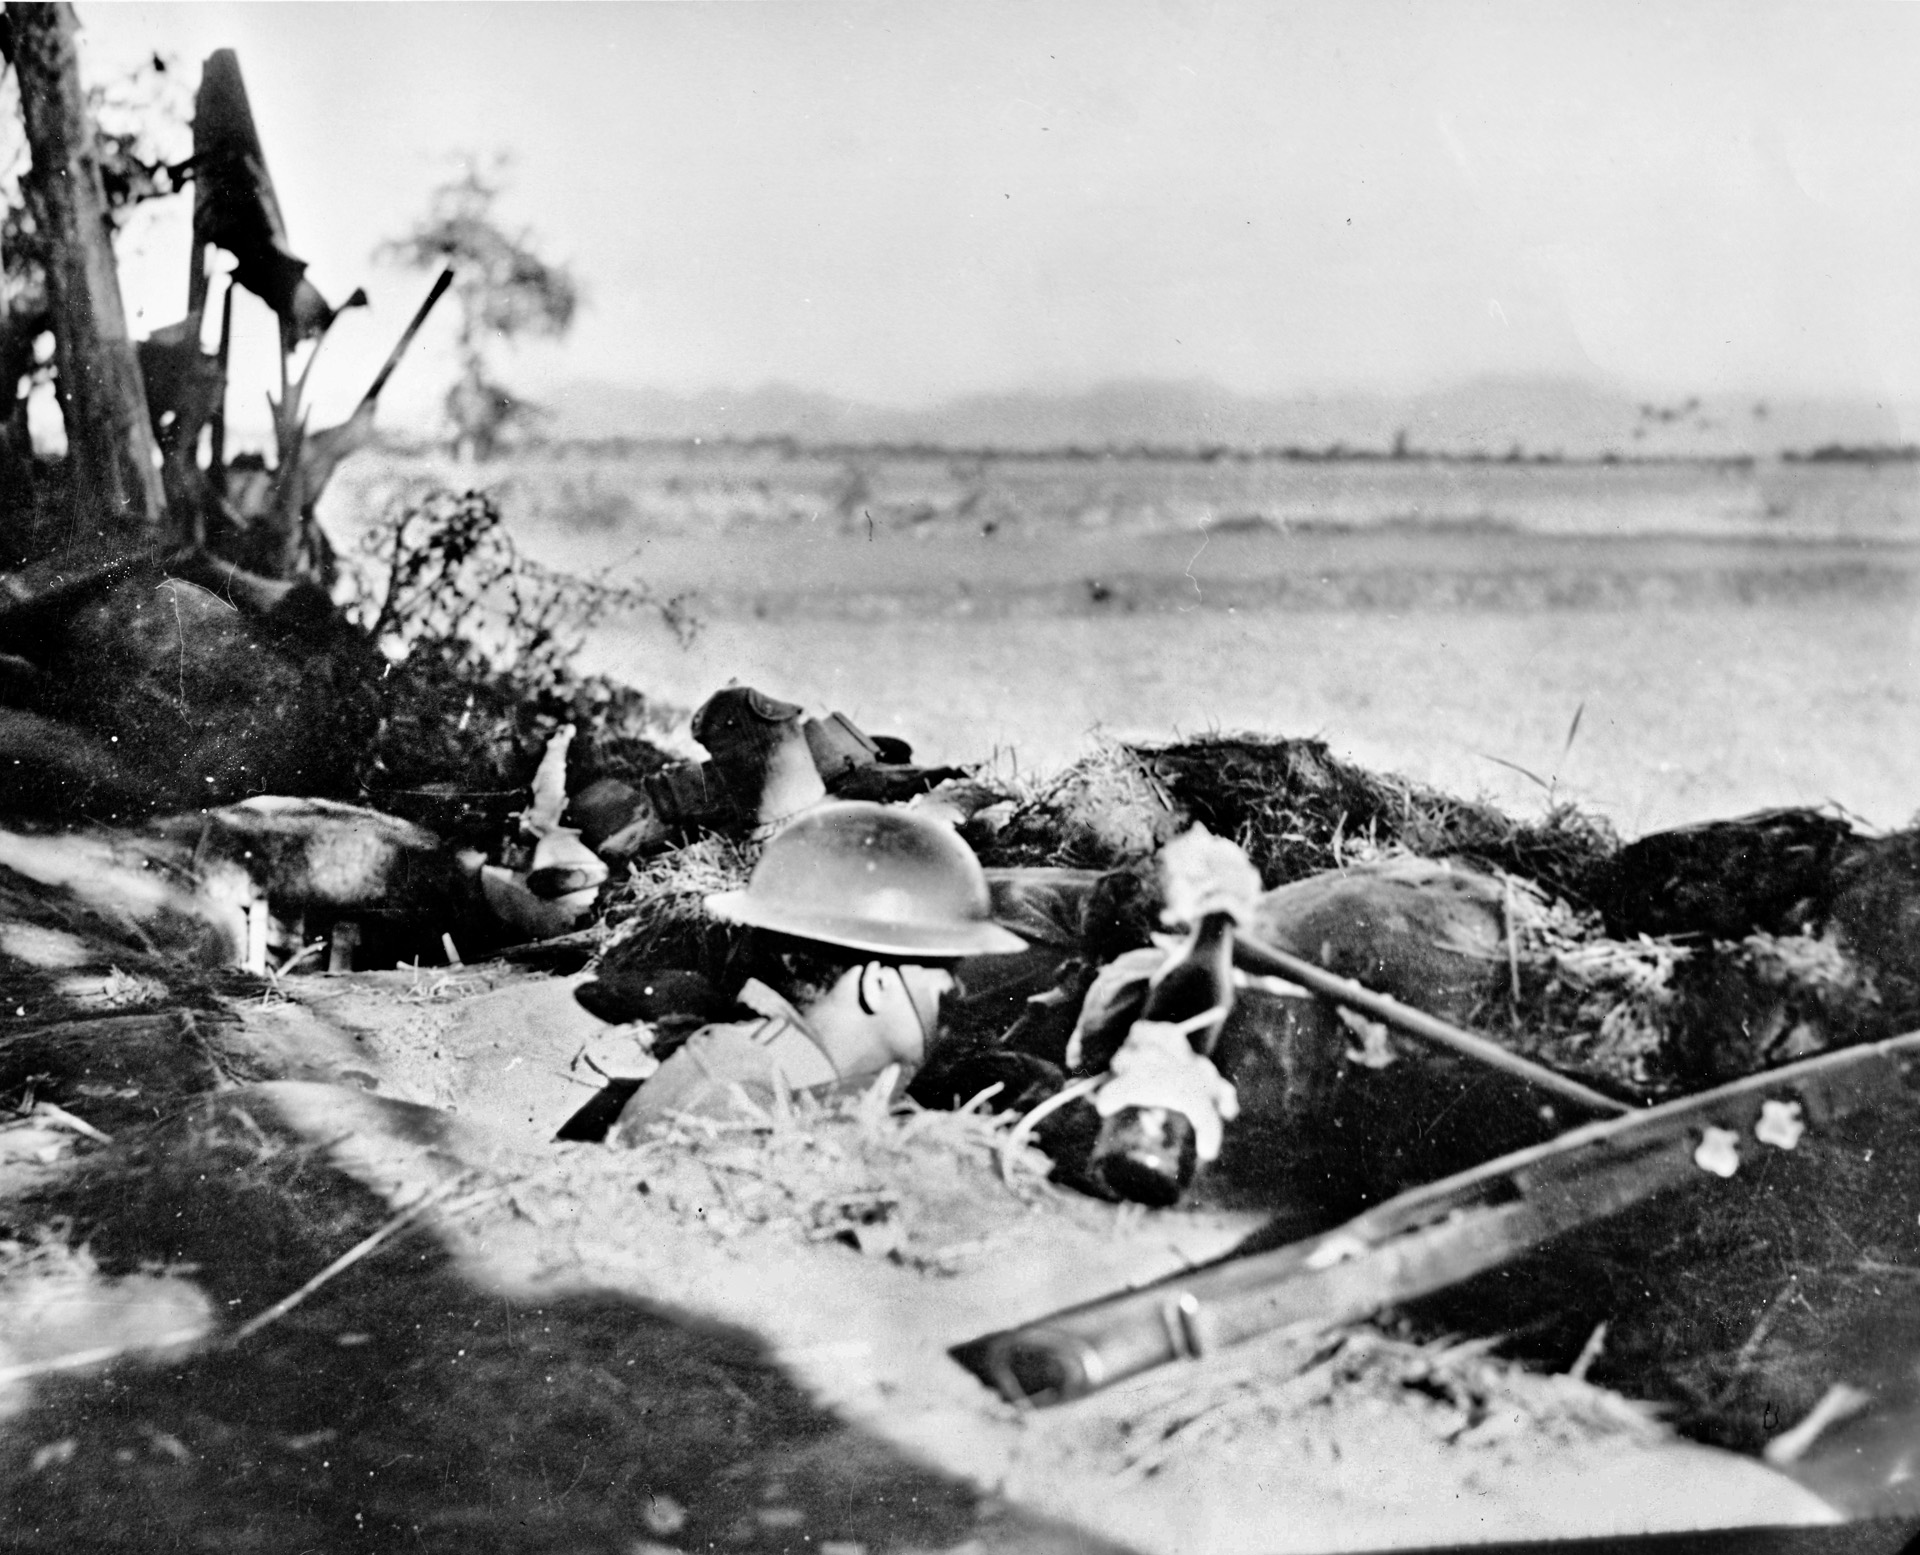 From his defensive position on the Bataan Peninsula, an American soldier watches the horizon for signs of the Japanese invaders. The soldier is armed with his government-issue rifle and a Molotov cocktail, simply a bottle filled with gasoline to be lit and thrown at enemy vehicles.